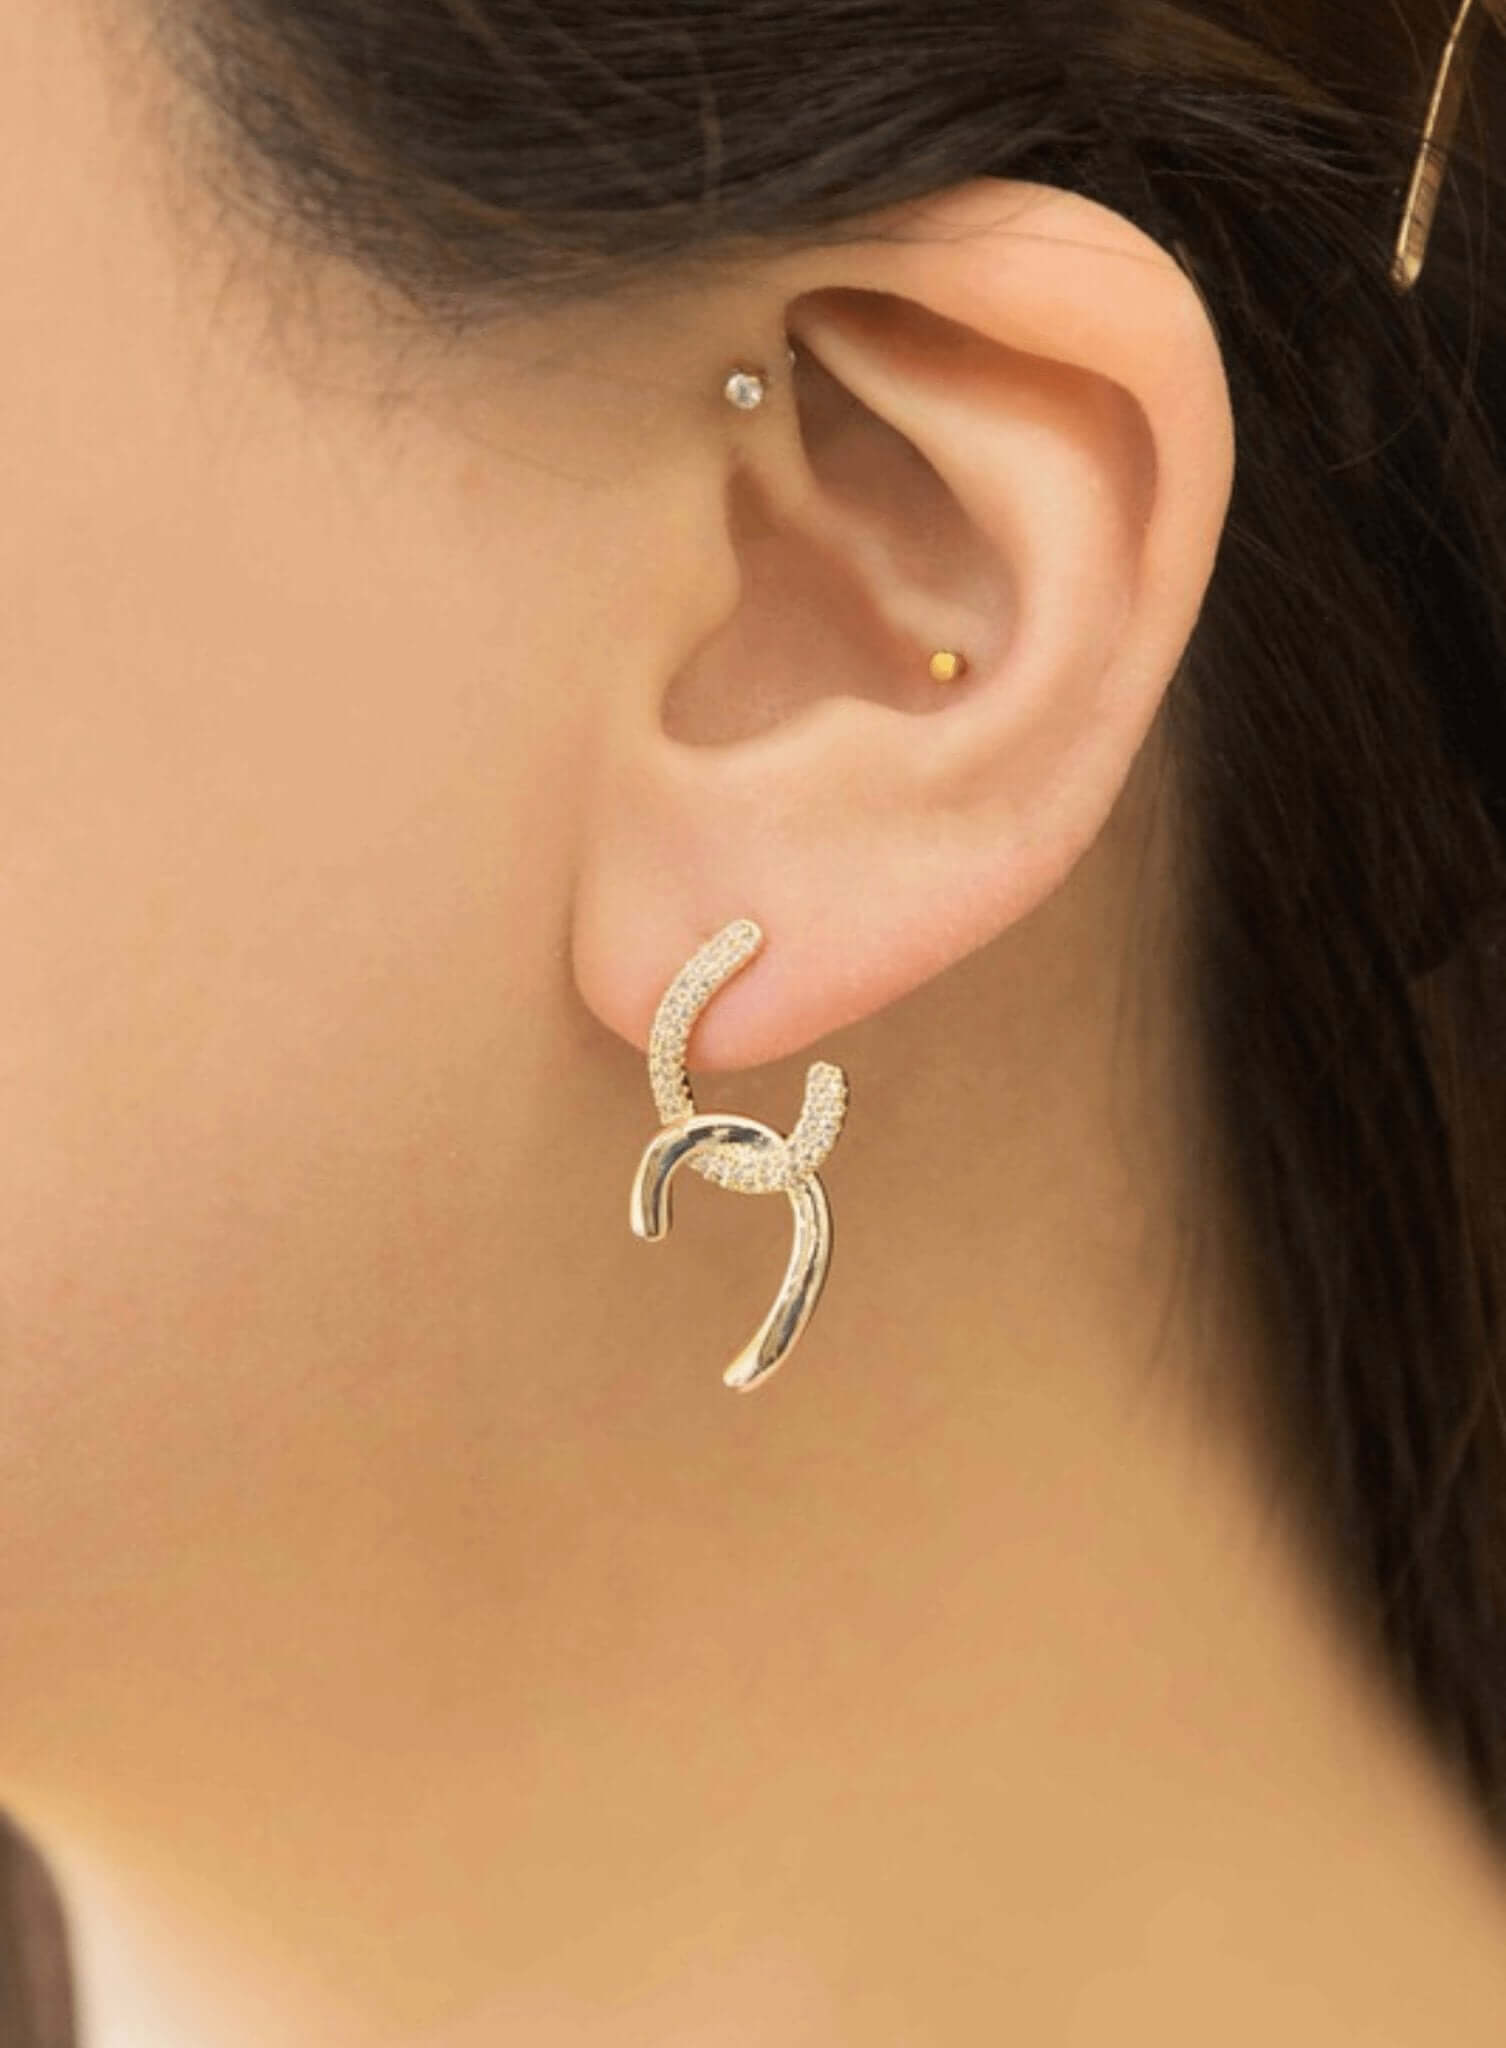 Connection Earrings - Rocca & Co